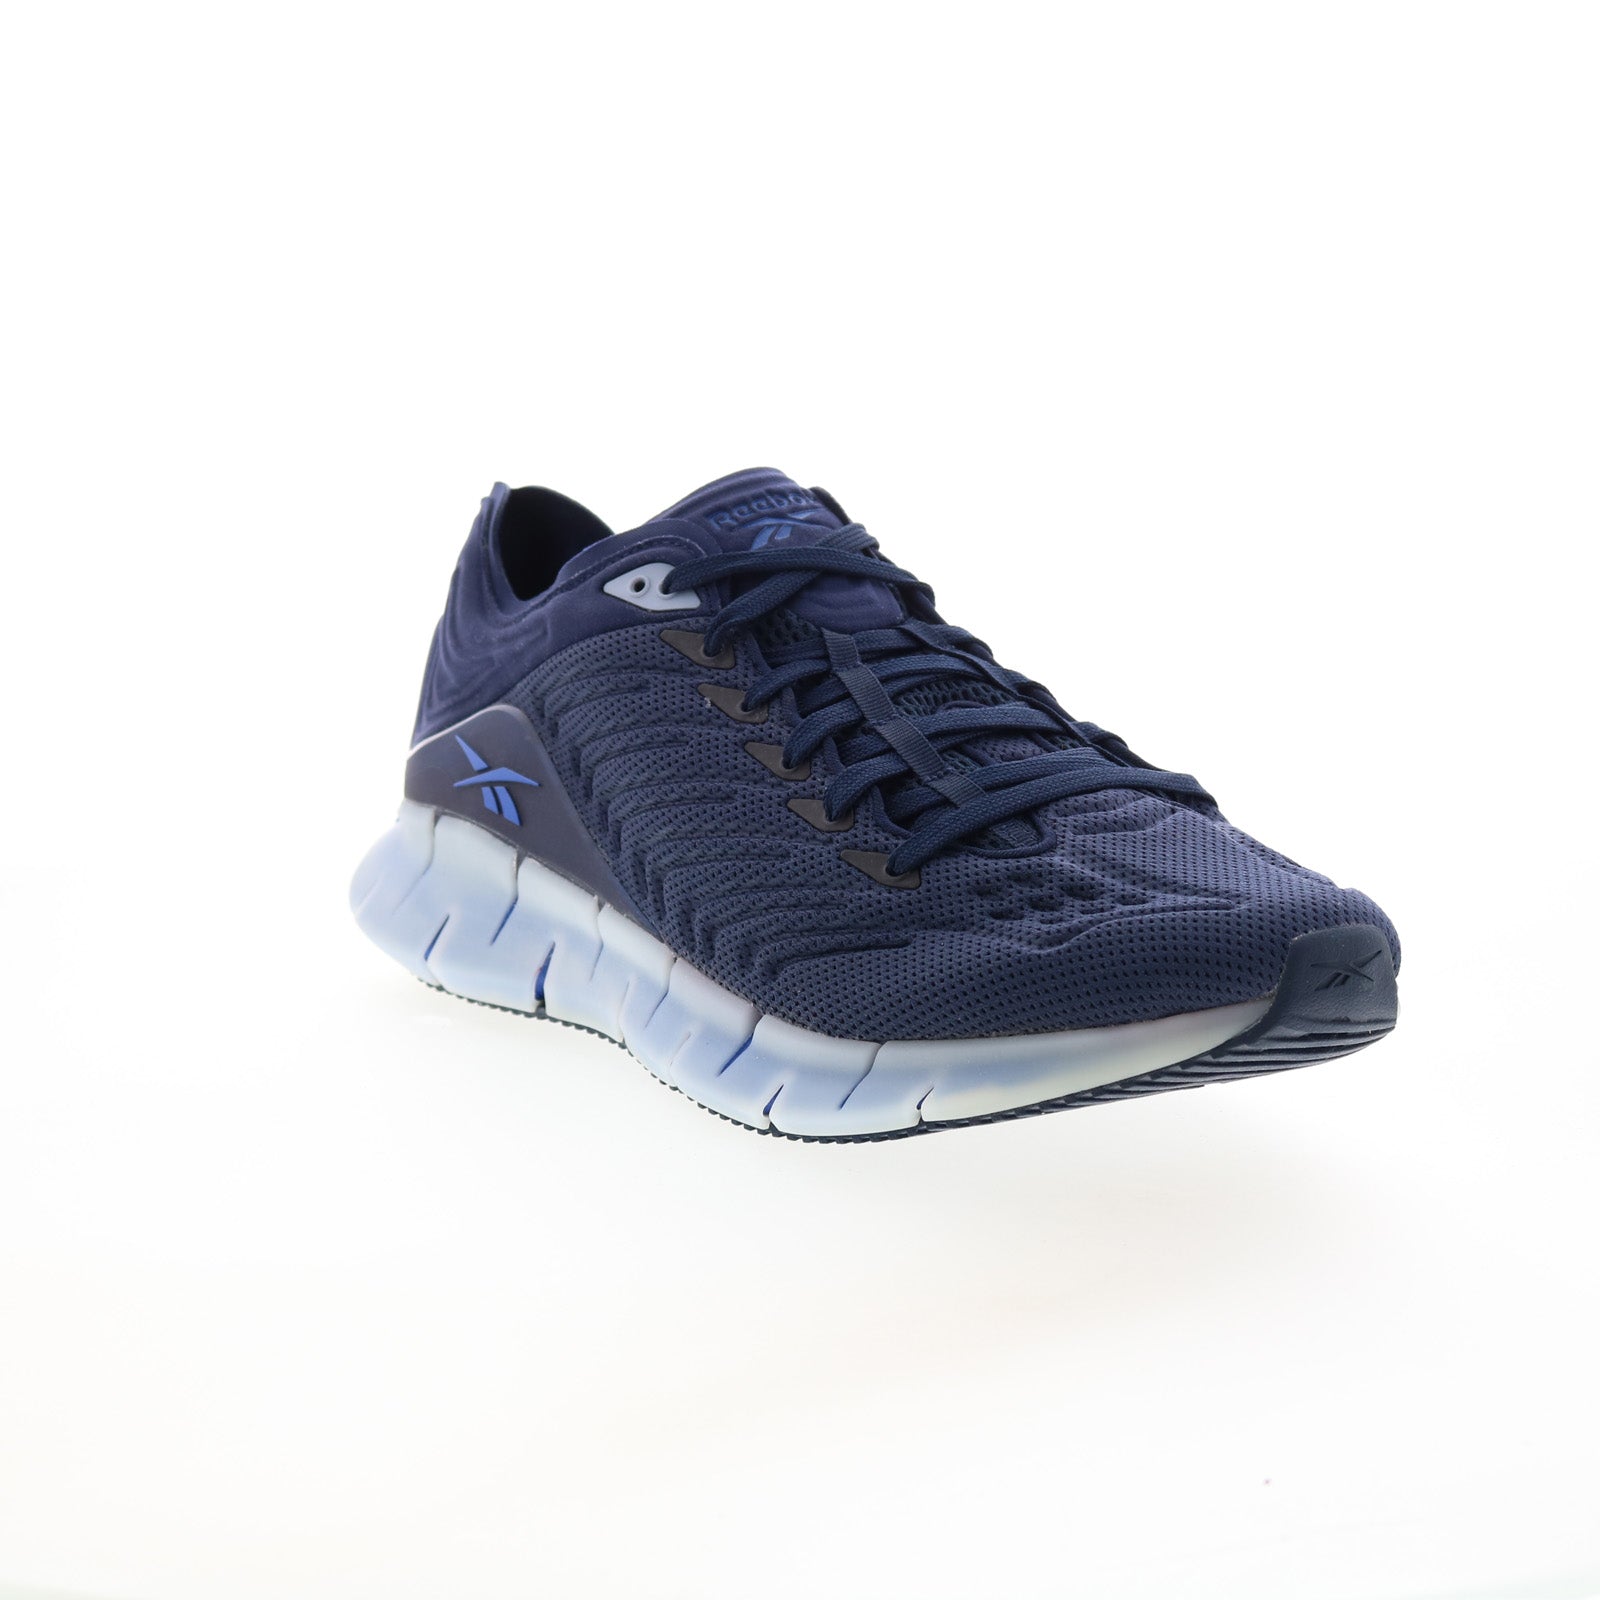 Reebok Zig Kinetica FW5292 Mens Blue Canvas Athletic Running Shoes - Ruze  Shoes